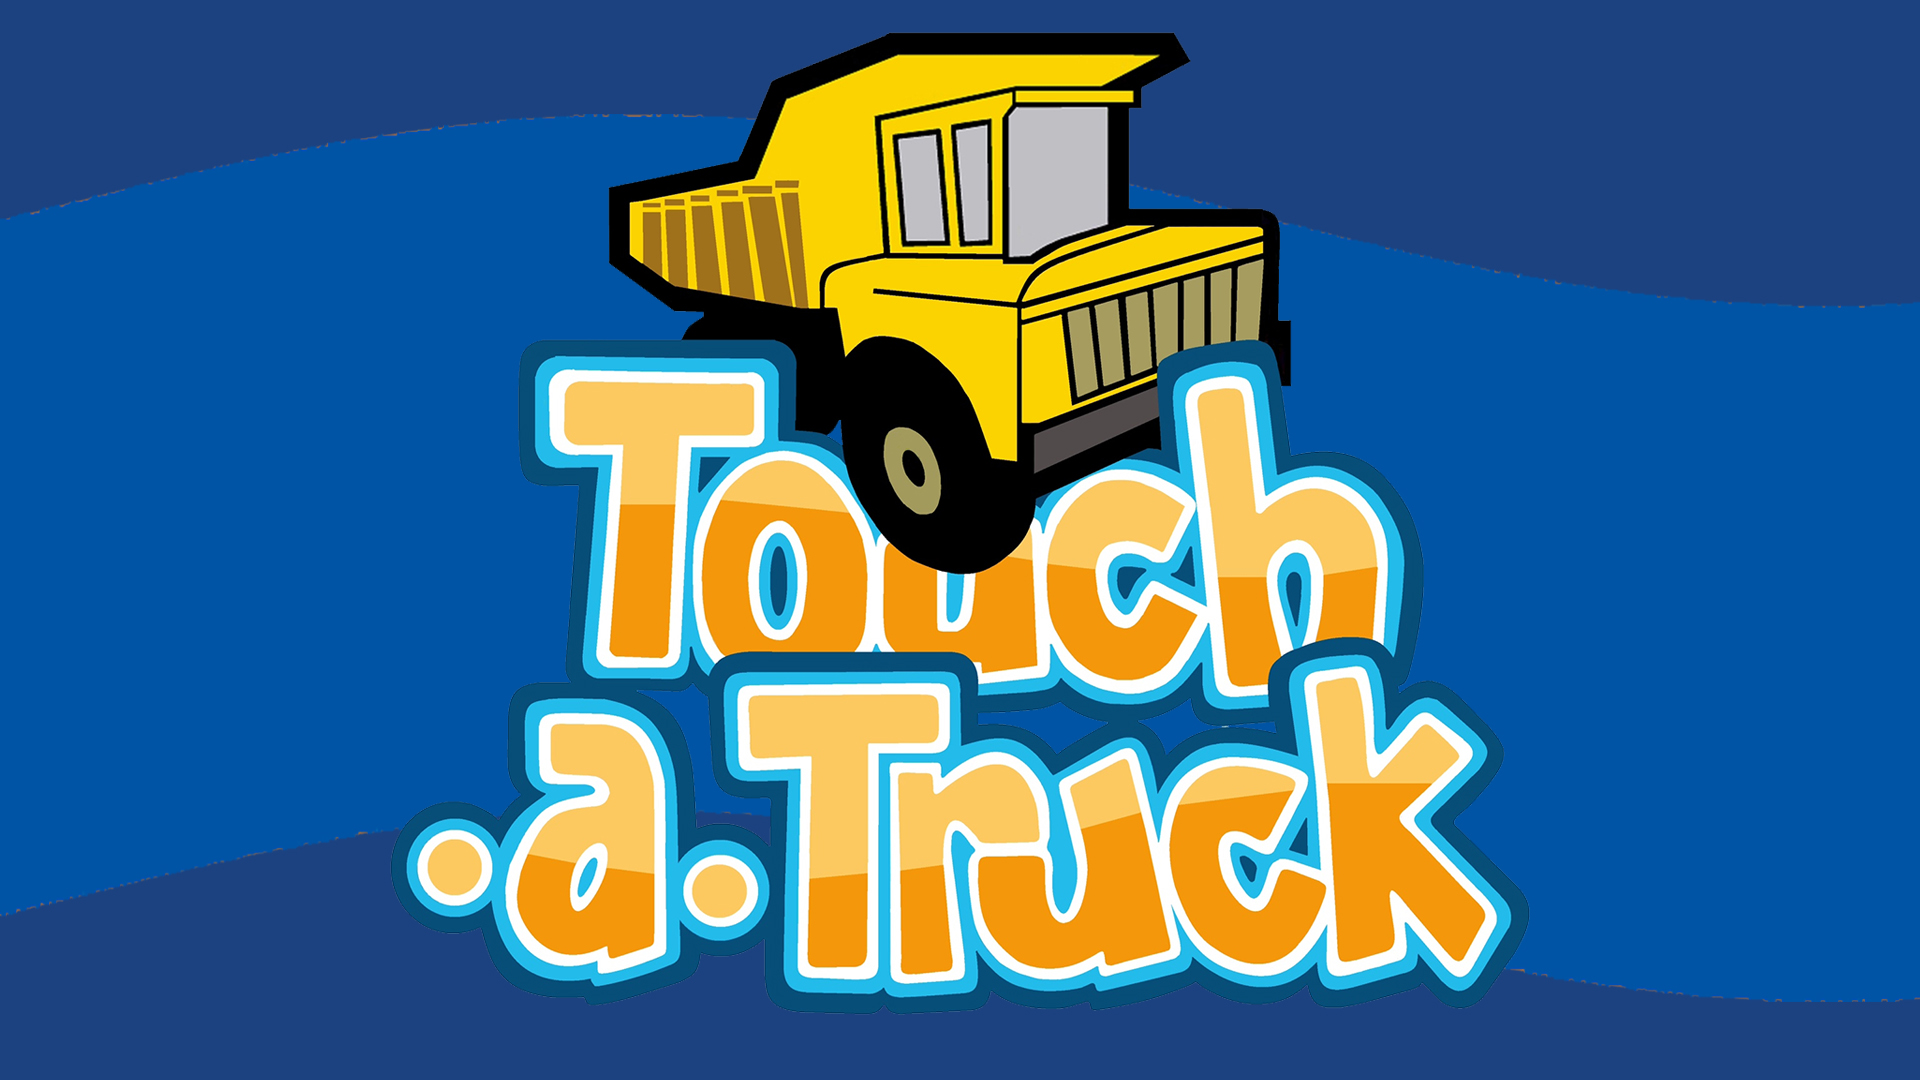 Here's what to expect at the 4th Annual TouchATruck Fresno event